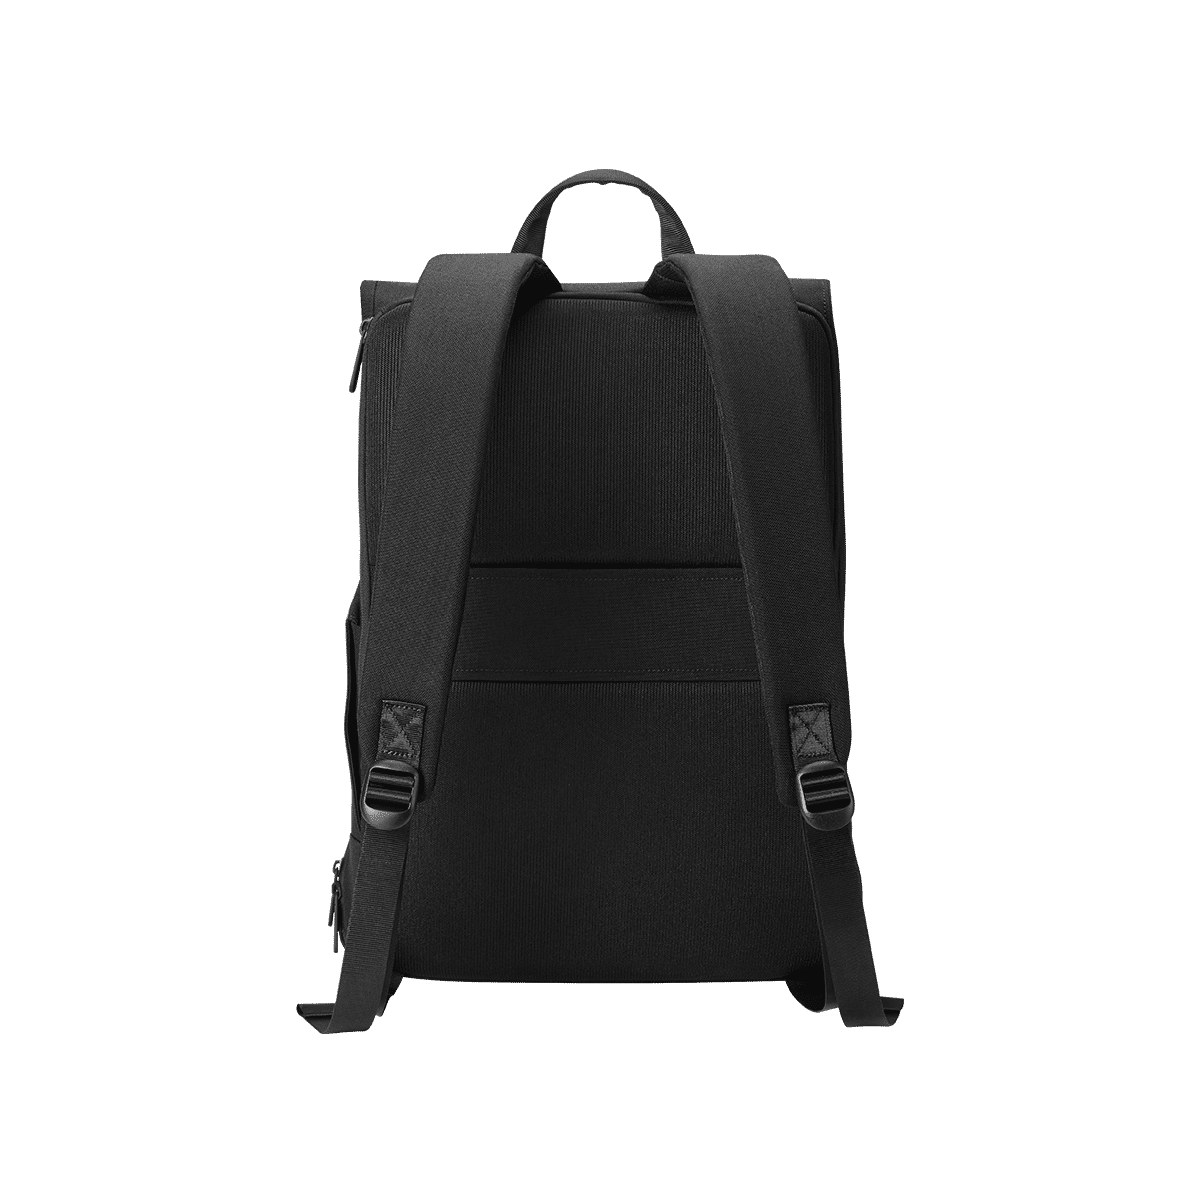 Official OnePlus Travel Luggage Bag